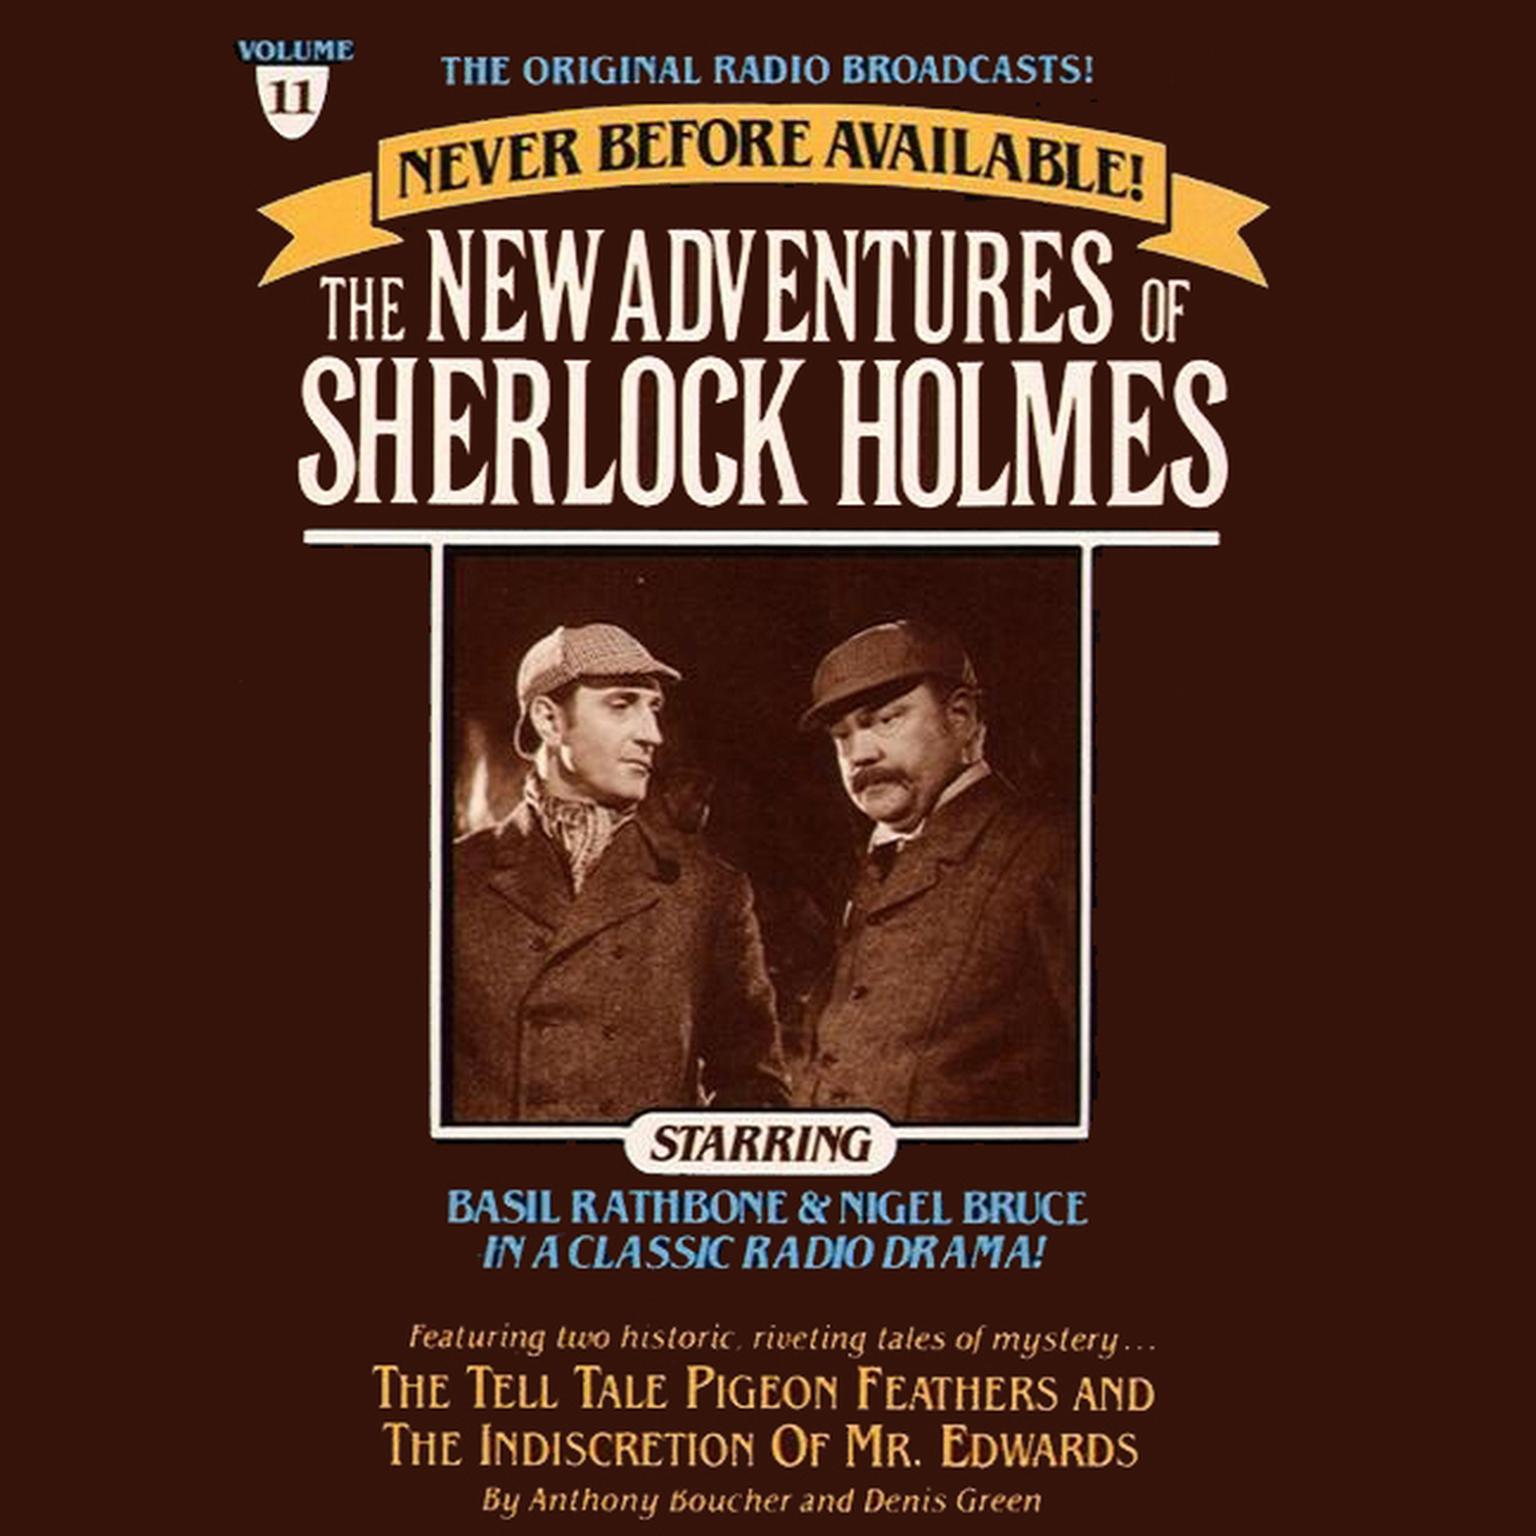 The Tell-Tale Pigeon Feathers and The Indiscretion of Mr. Edwards (Abridged): The New Adventures of Sherlock Holmes, Episode 11 Audiobook, by Anthony Boucher